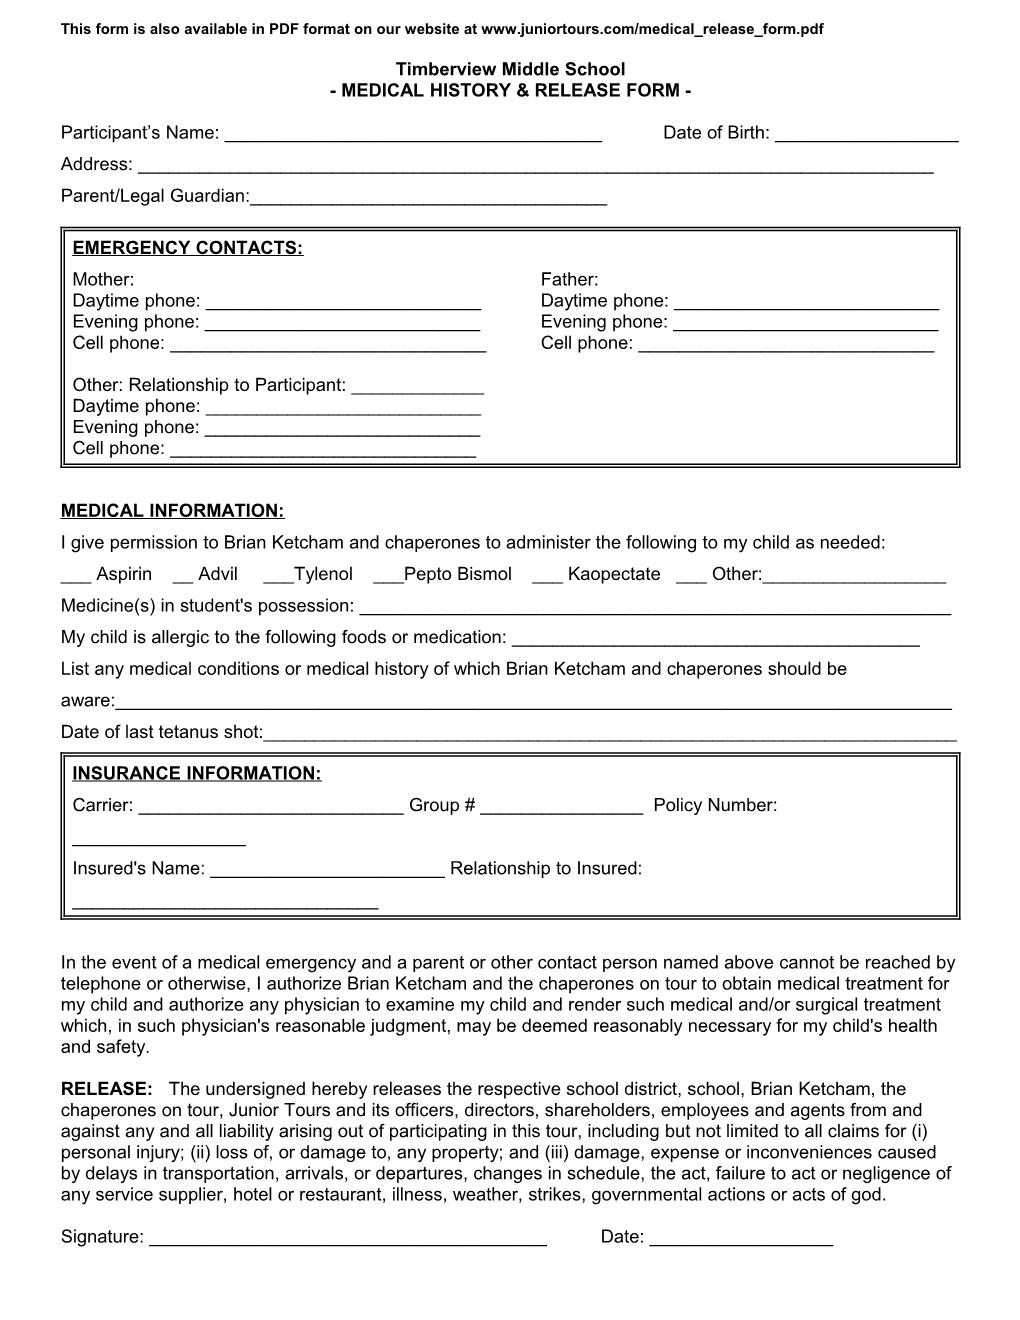 This Form Is Also Available in PDF Format on Our Website At